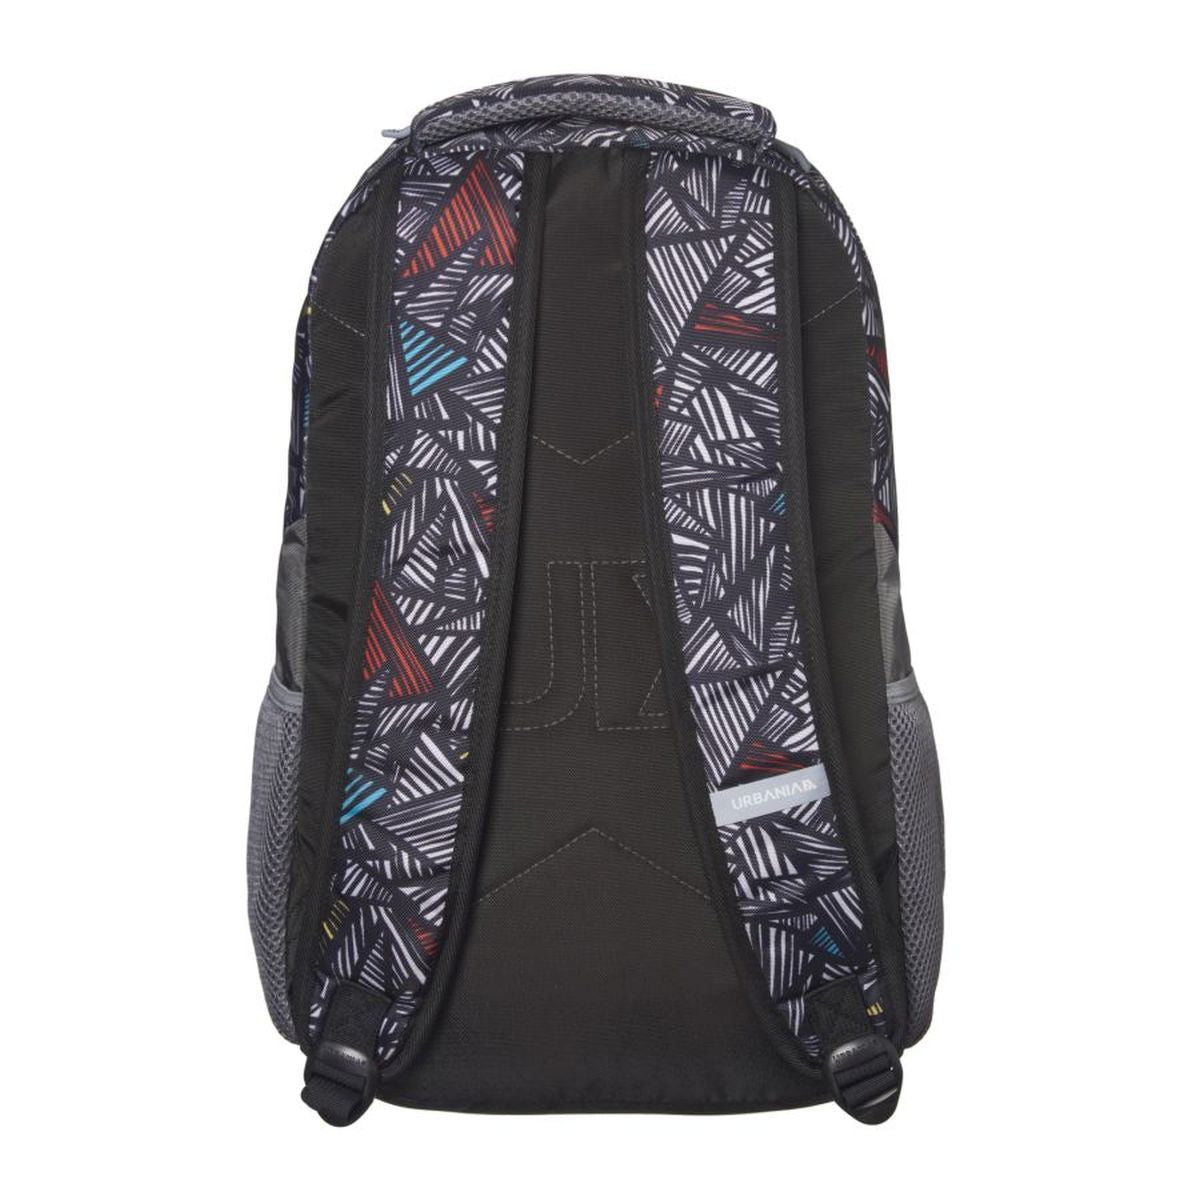 Backpack 44 Trends Triangles